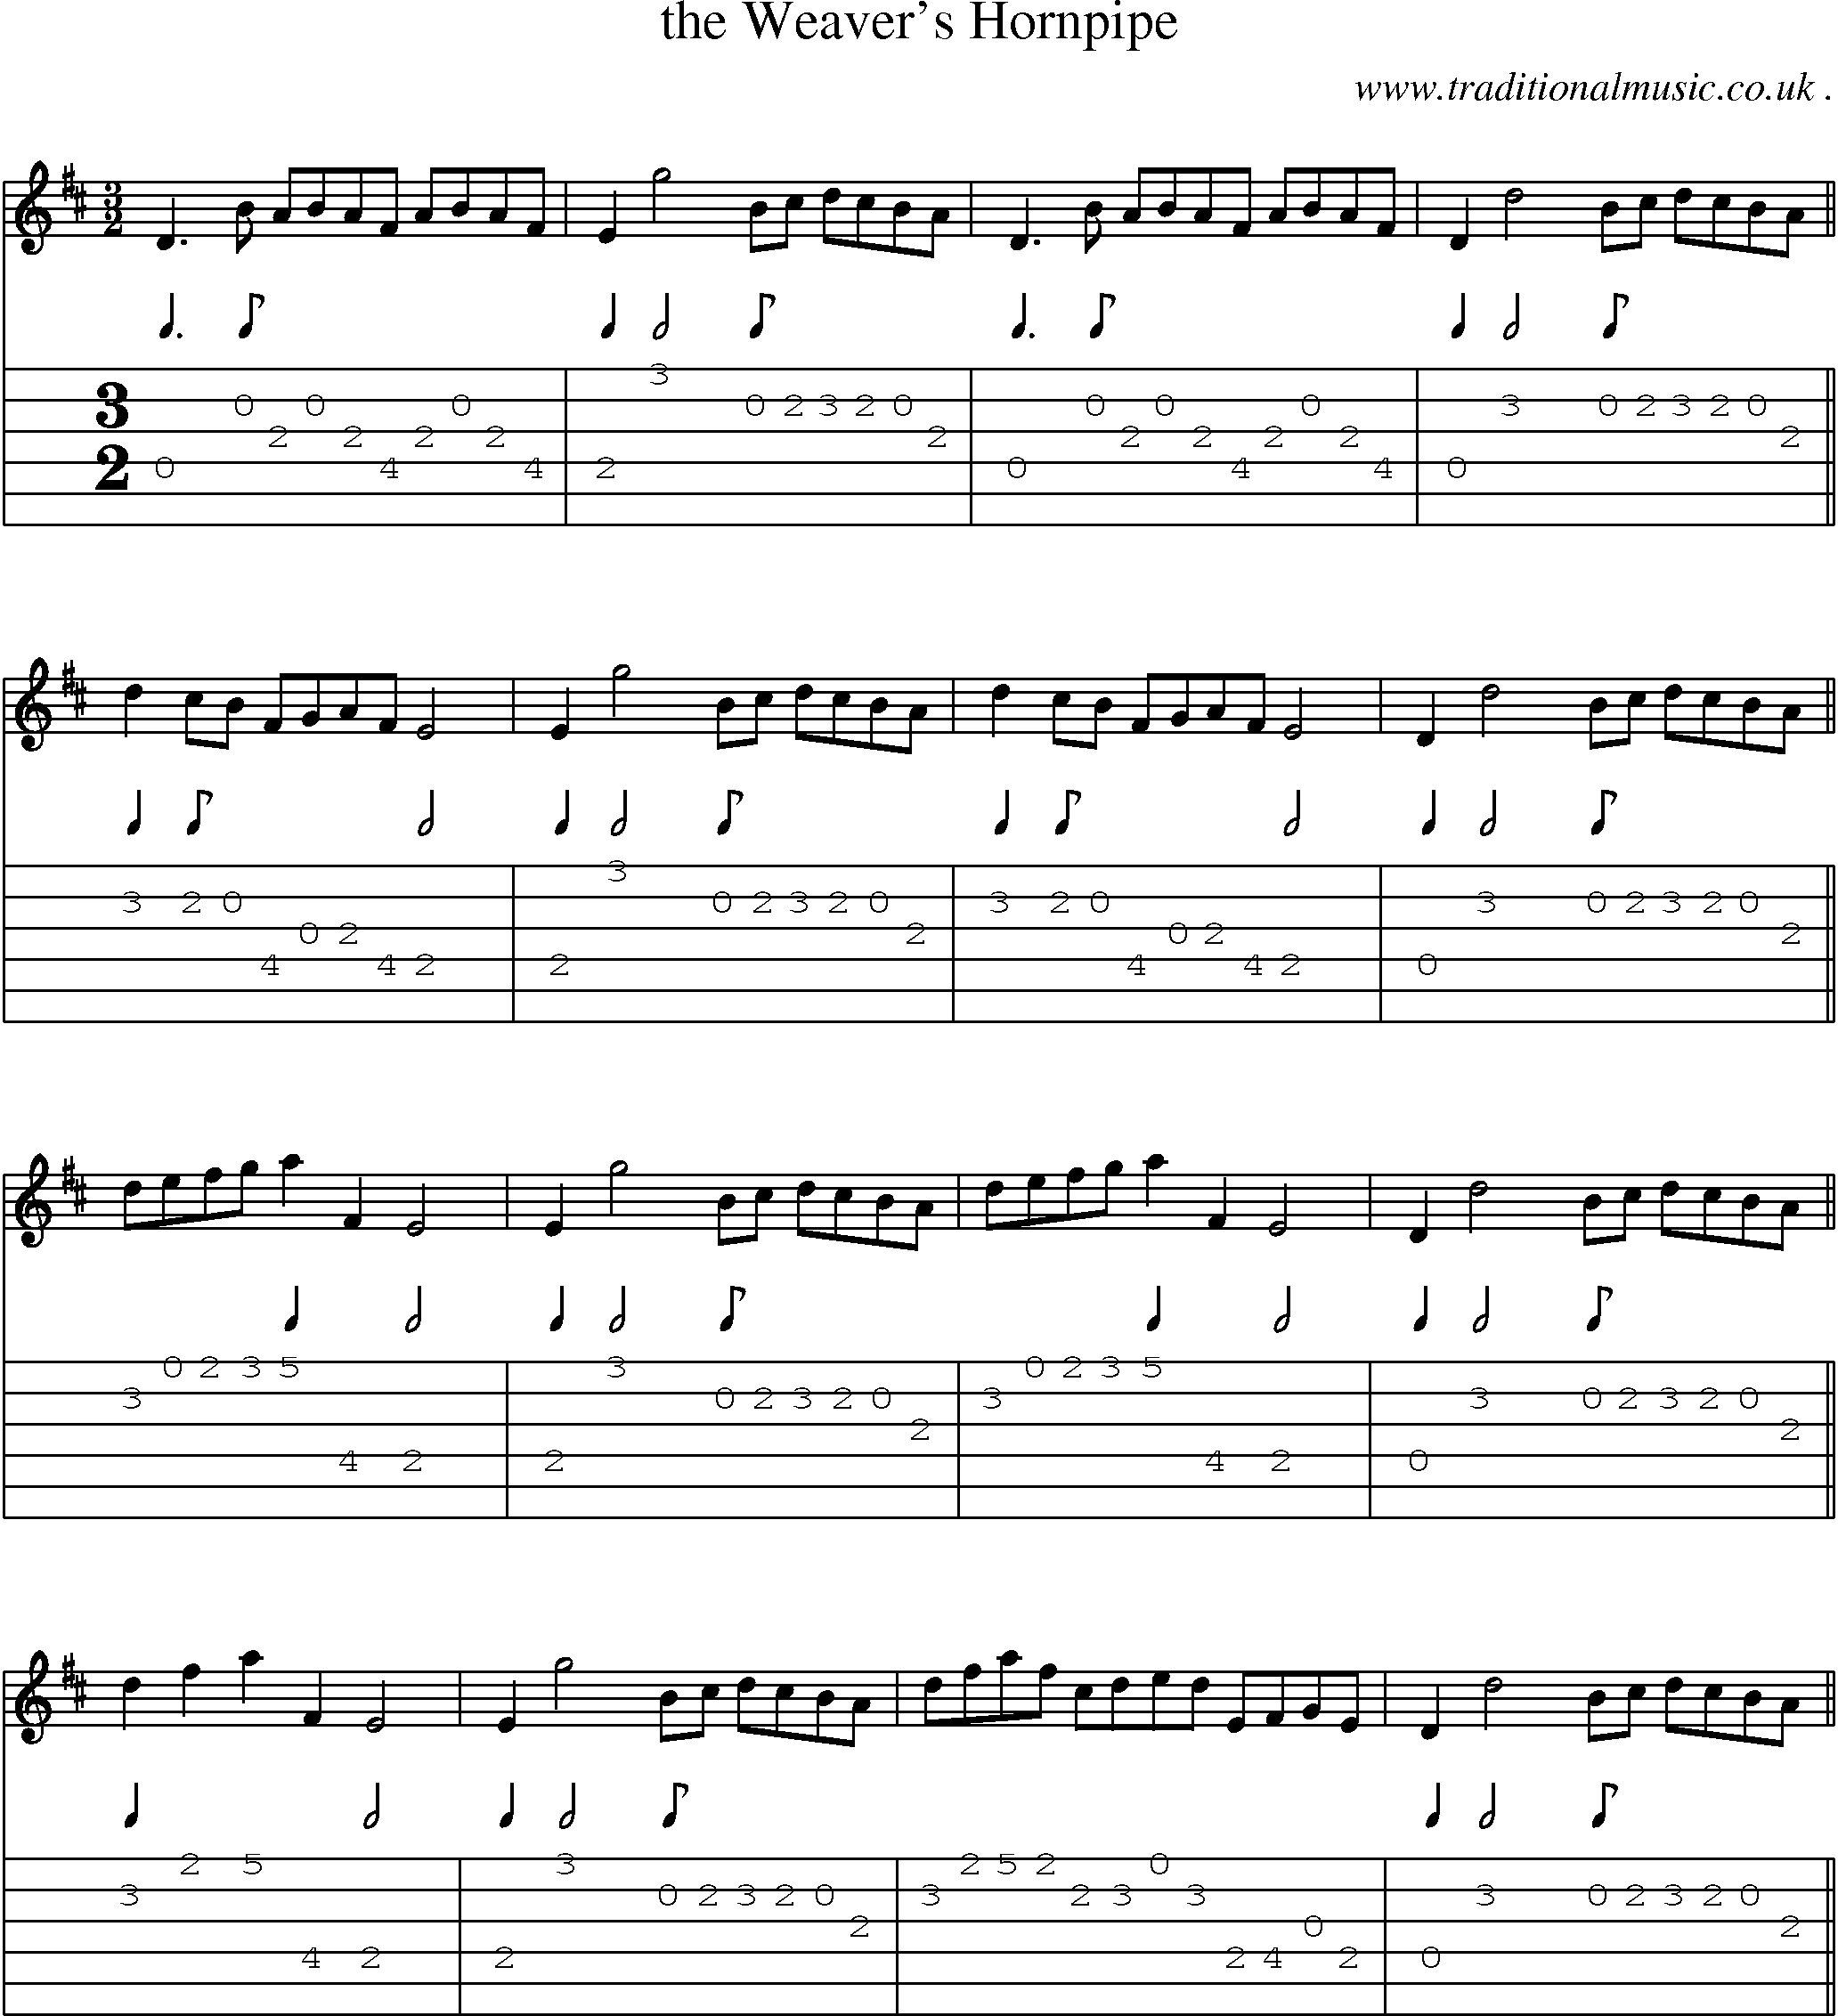 Sheet-Music and Guitar Tabs for The Weavers Hornpipe